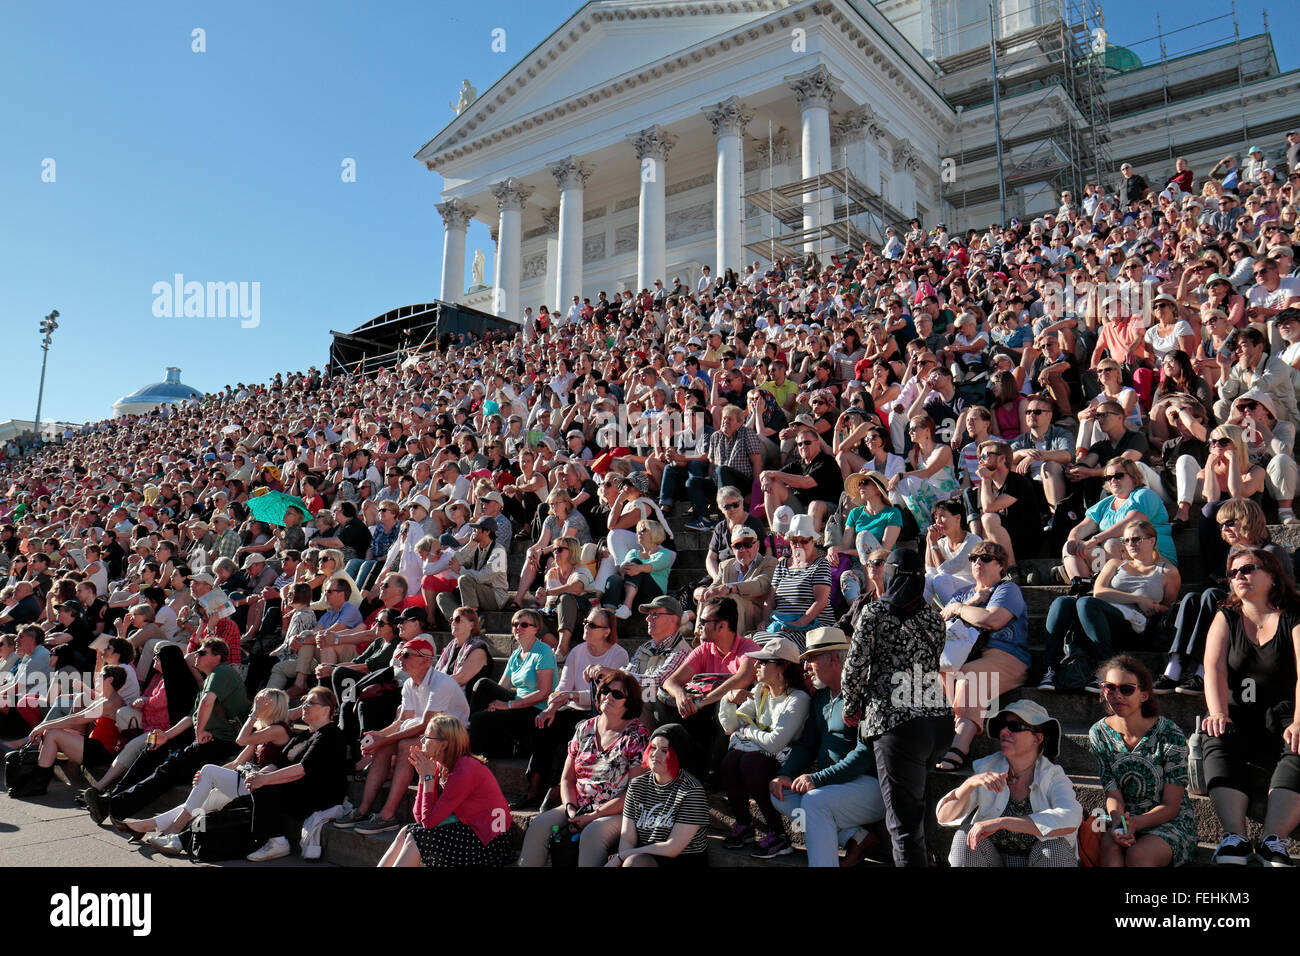 A large crowd watching an outdoor music performance in Helsinki, Finland. Stock Photo